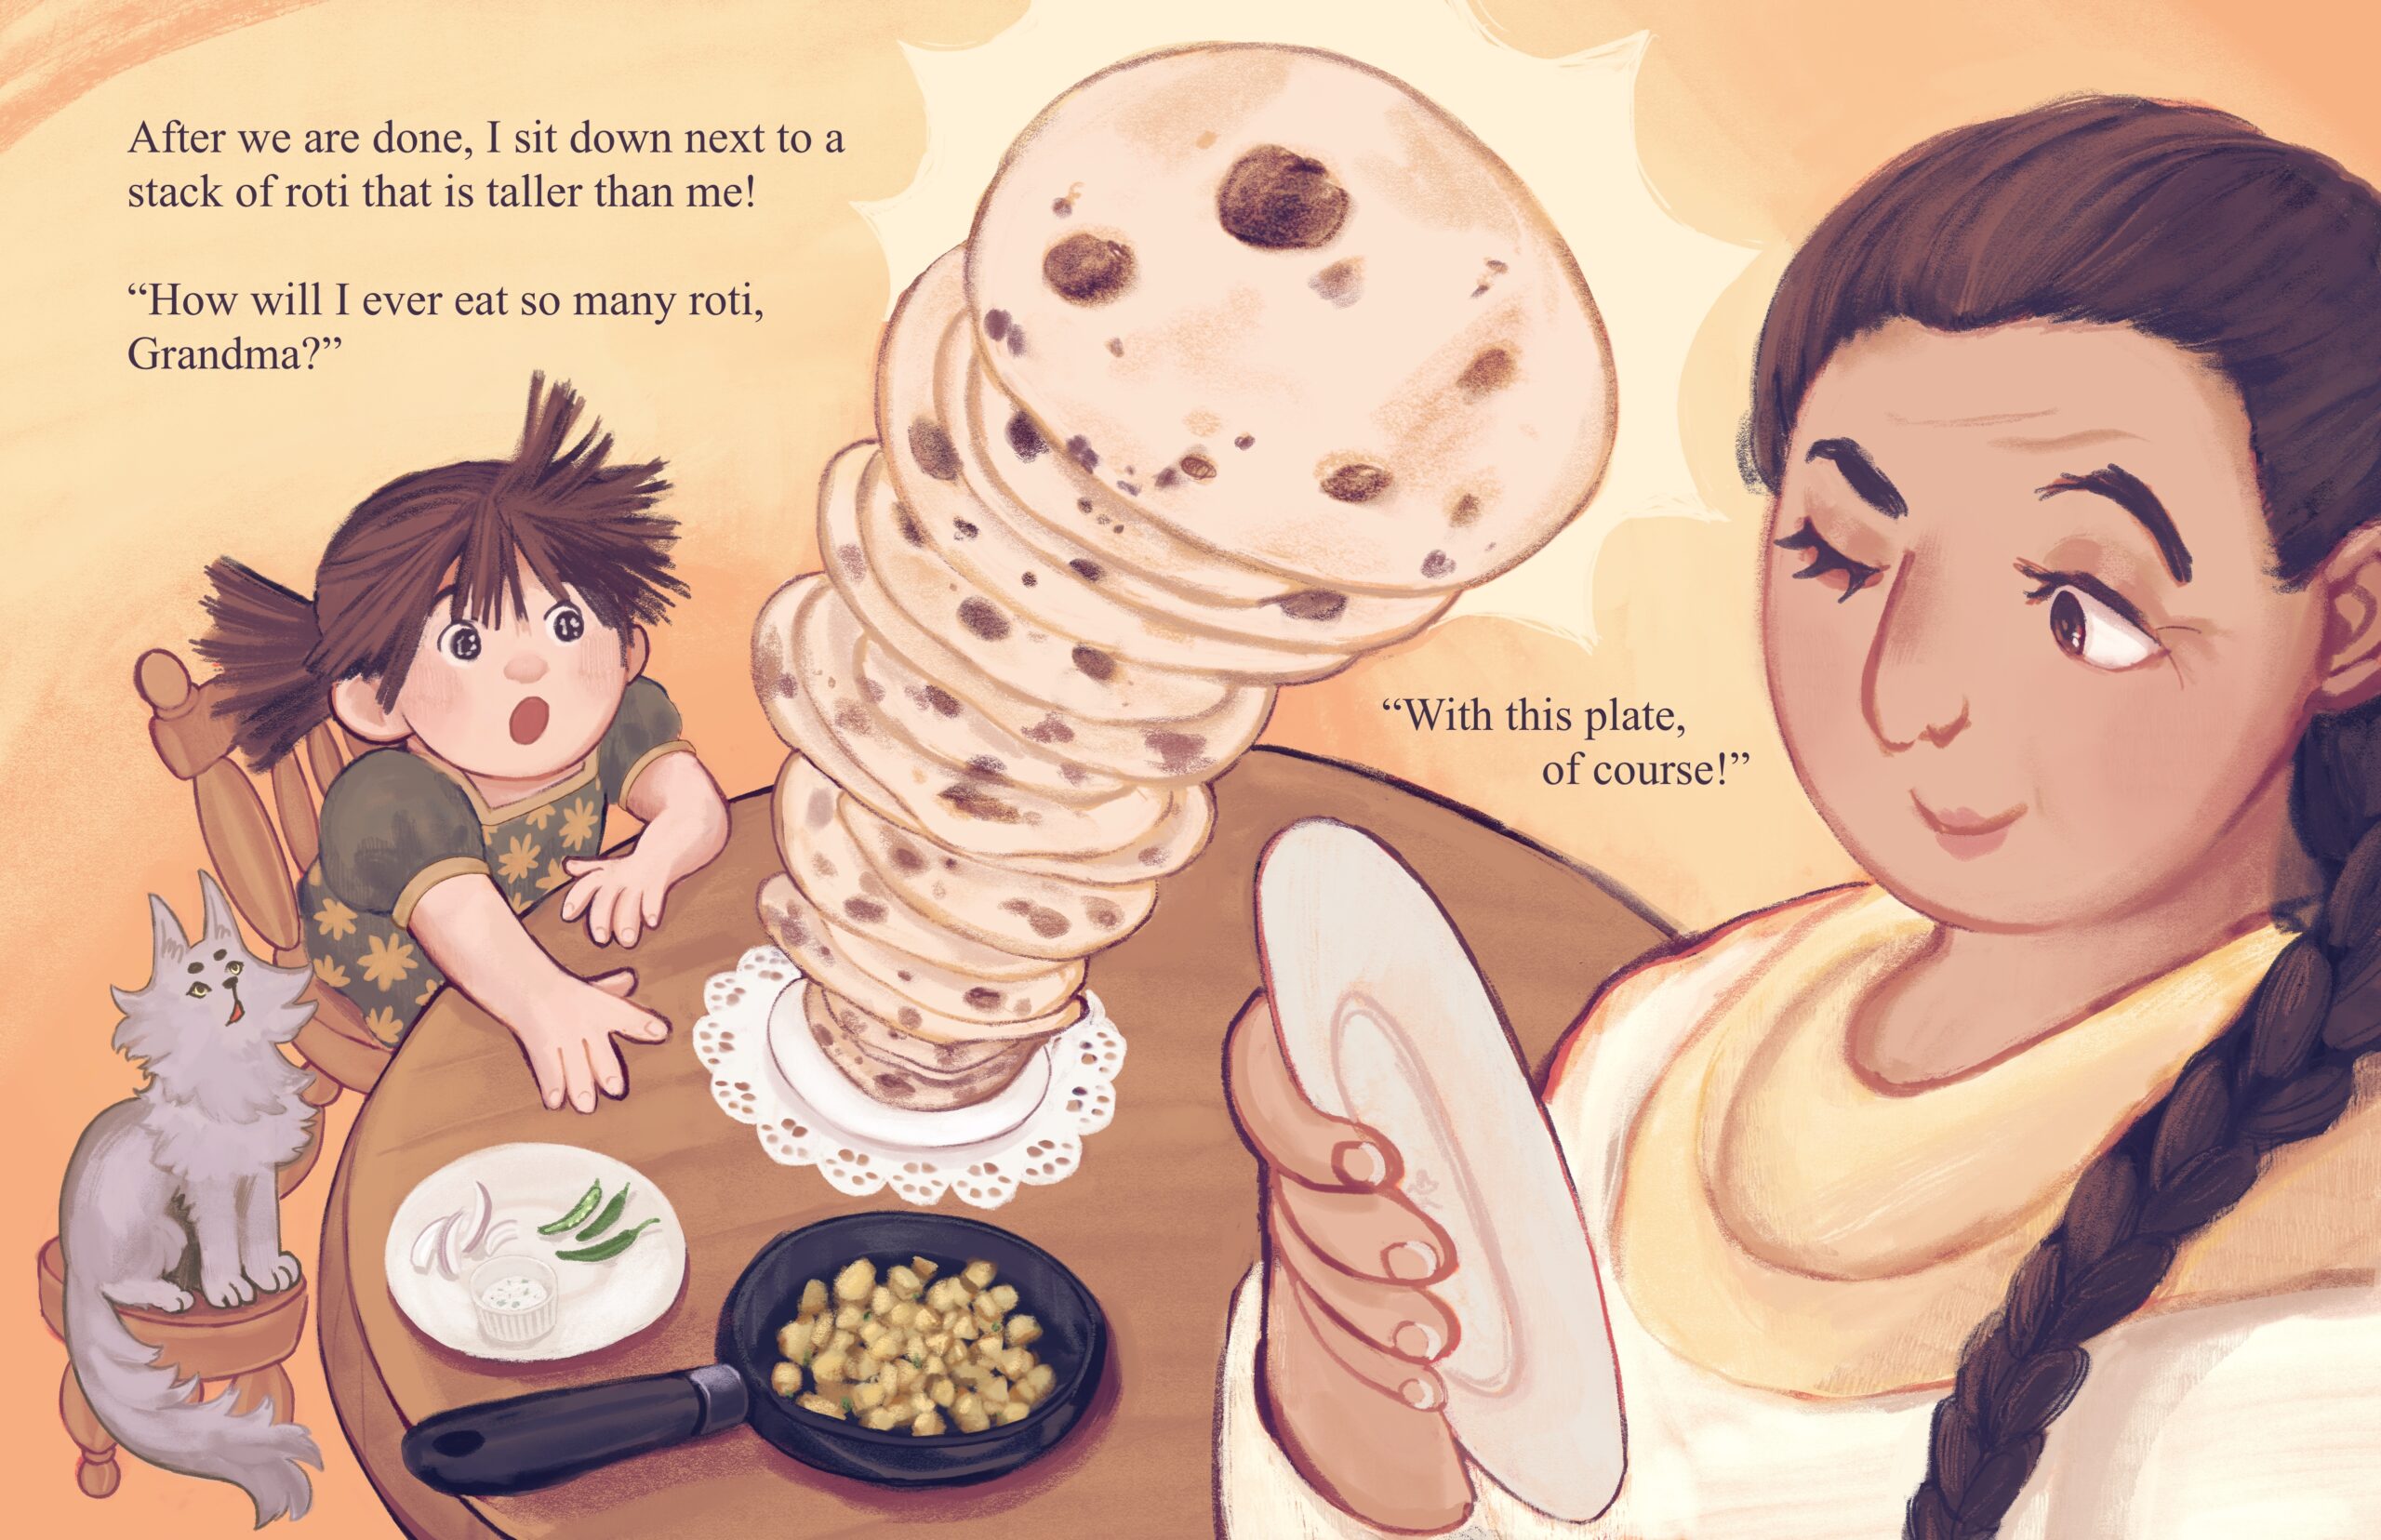 A side project reflecting on the intergenerational relationship between my younger self and my grandma. We would bond through cooking, making one of my favorite foods: roti! 
This fledgling story concept follows a young girl's trip to grandma's house, and through many trials (and mishaps) the recipe is complete. At the end, a recipe from our families roti would be included.